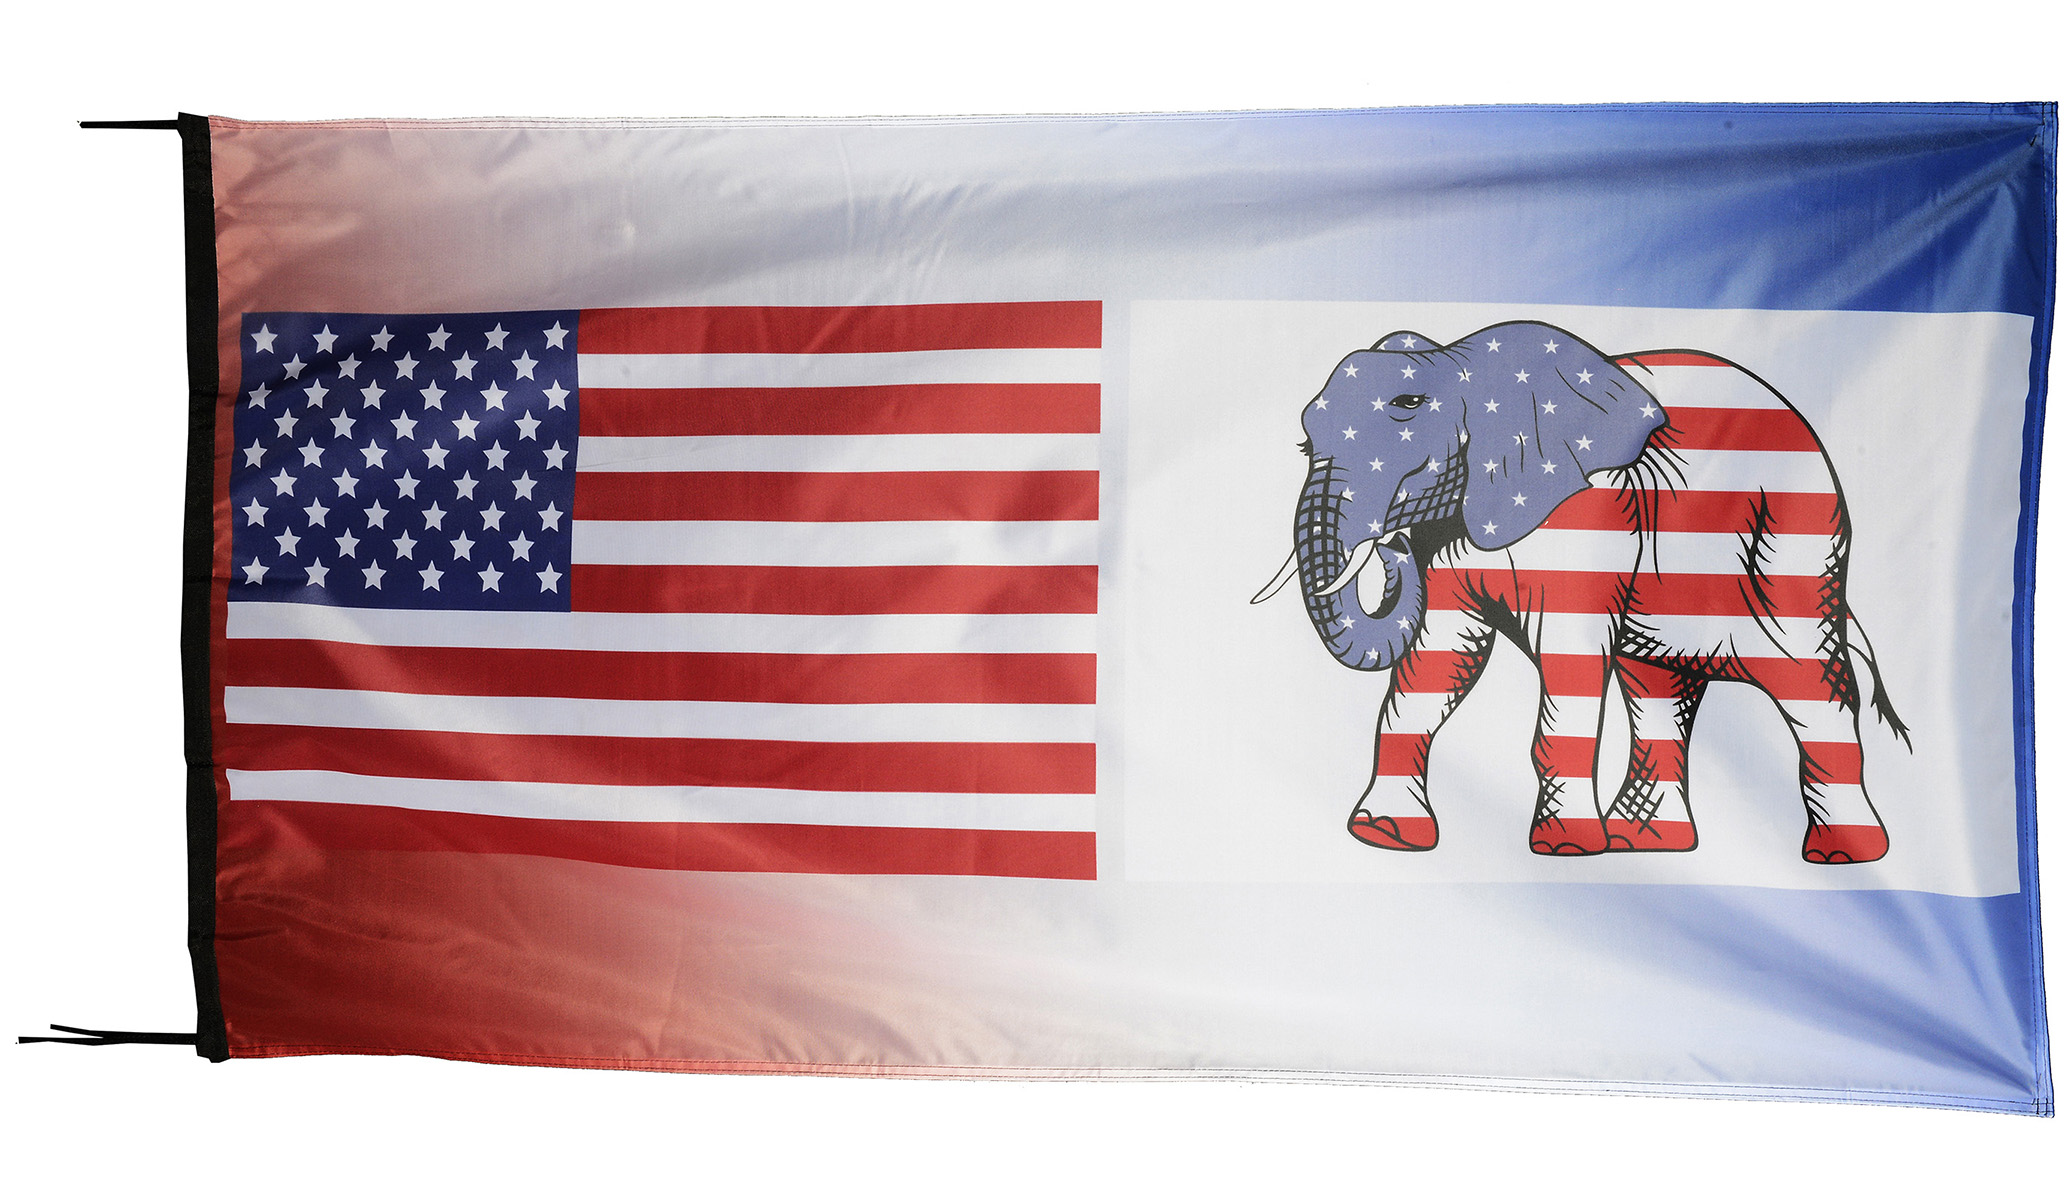 Flag  077 USA / US Country / United States Of America and Republicans Party / Senators / Congress / Washington / White House / Capitol / Politics / Presidential / Elections / Washington / Pride Hybrid Weather-Resistant Polyester Outdoor Flag Landscape Banner / Vivid Colors / 3 X 5 FT (150 x 90cm) International Flags for Sale